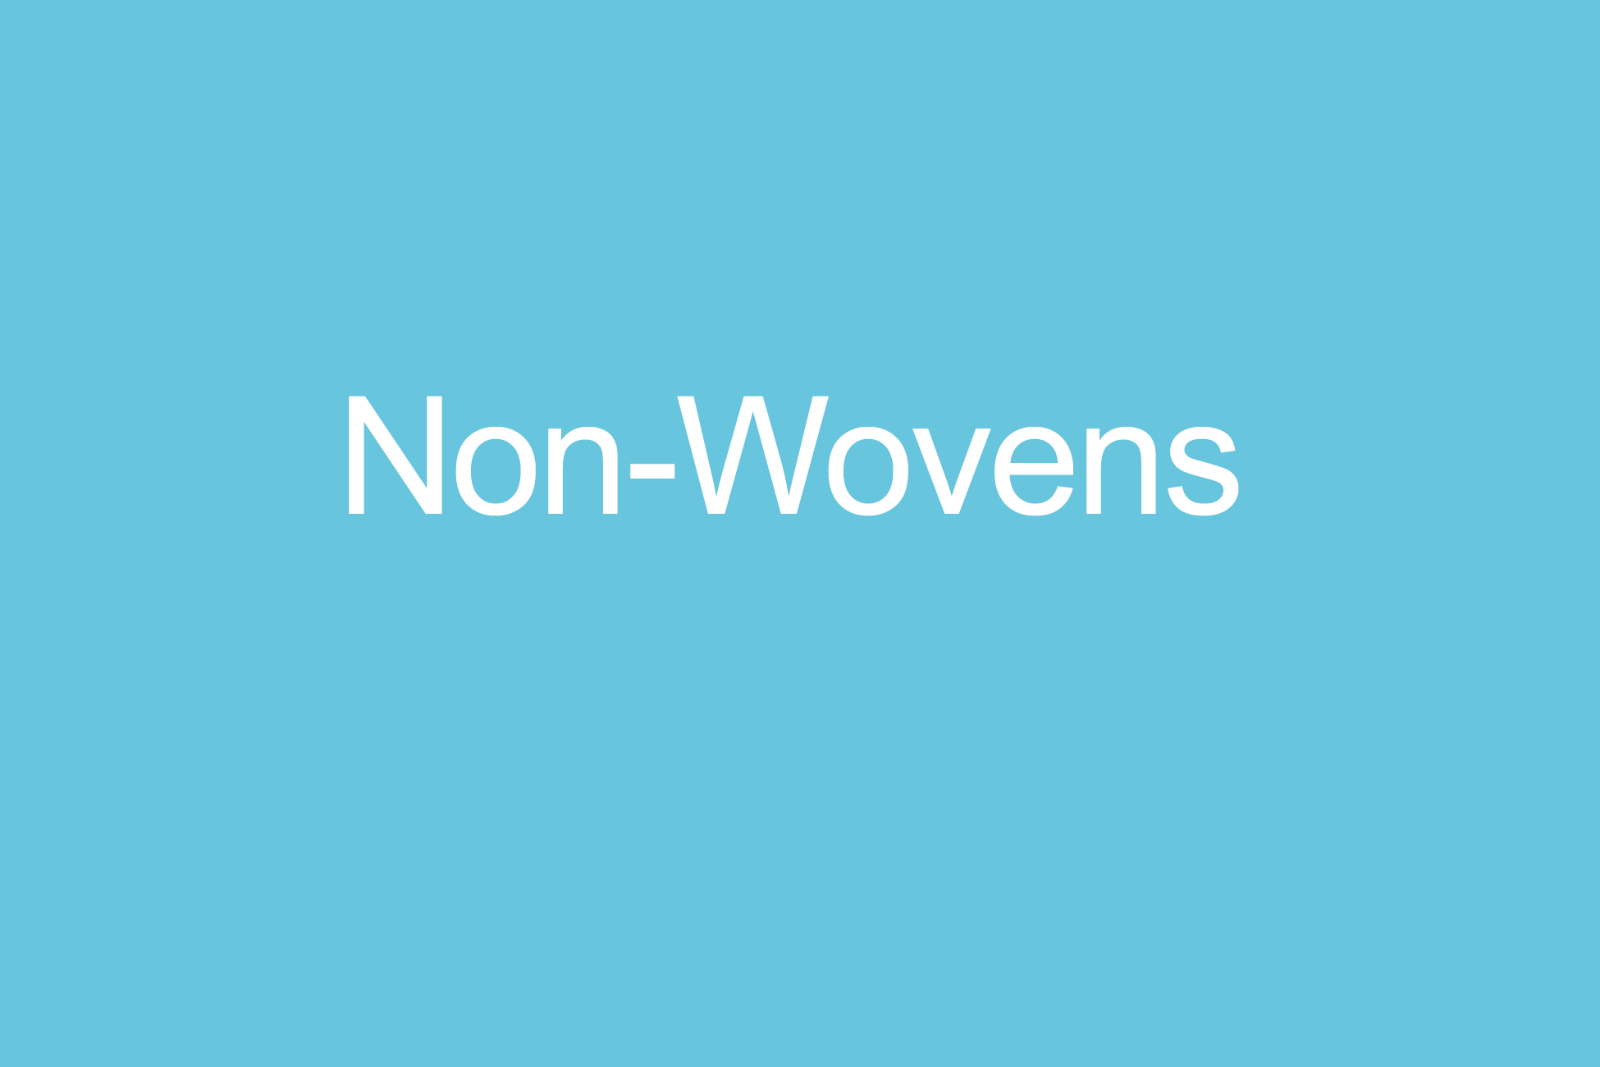 Often, nonwovens are combined with other materials. Our expertise is machines for converting non-woven materials for the areas: Absorbent Hygiene Products, Food & Beverage, Household Wipes, Medical, Packaging Wipes 
